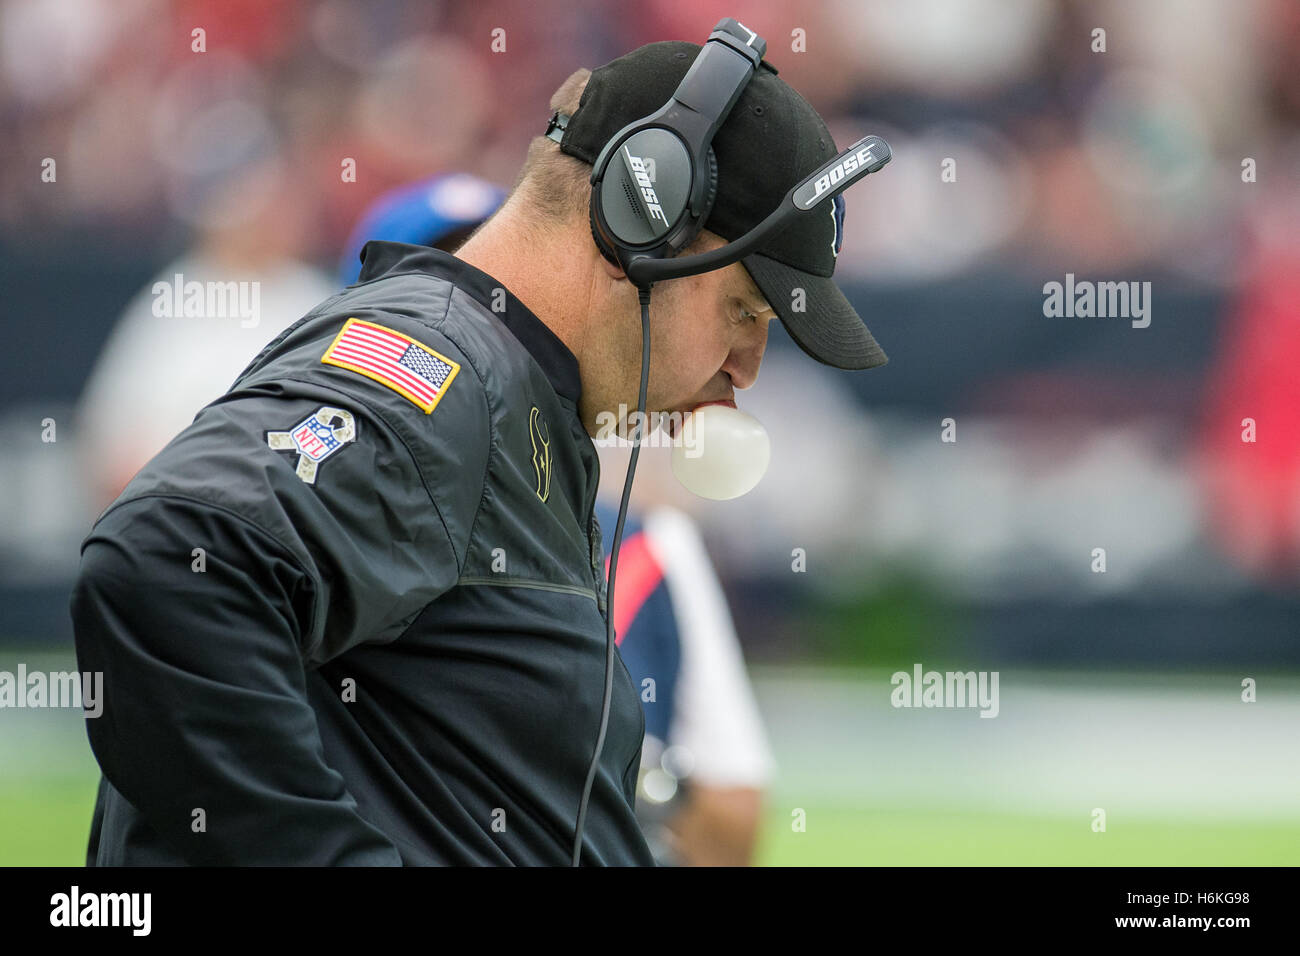 Houston, Texas, USA. 30th Oct, 2016. Houston Texans head coach Bill O'Brien blows a bubble during the 2nd quarter of an NFL game between the Houston Texans and the Detroit Lions at NRG Stadium in Houston, TX on October 30th, 2016. The Texans won the game 20-13. Credit:  Trask Smith/ZUMA Wire/Alamy Live News Stock Photo